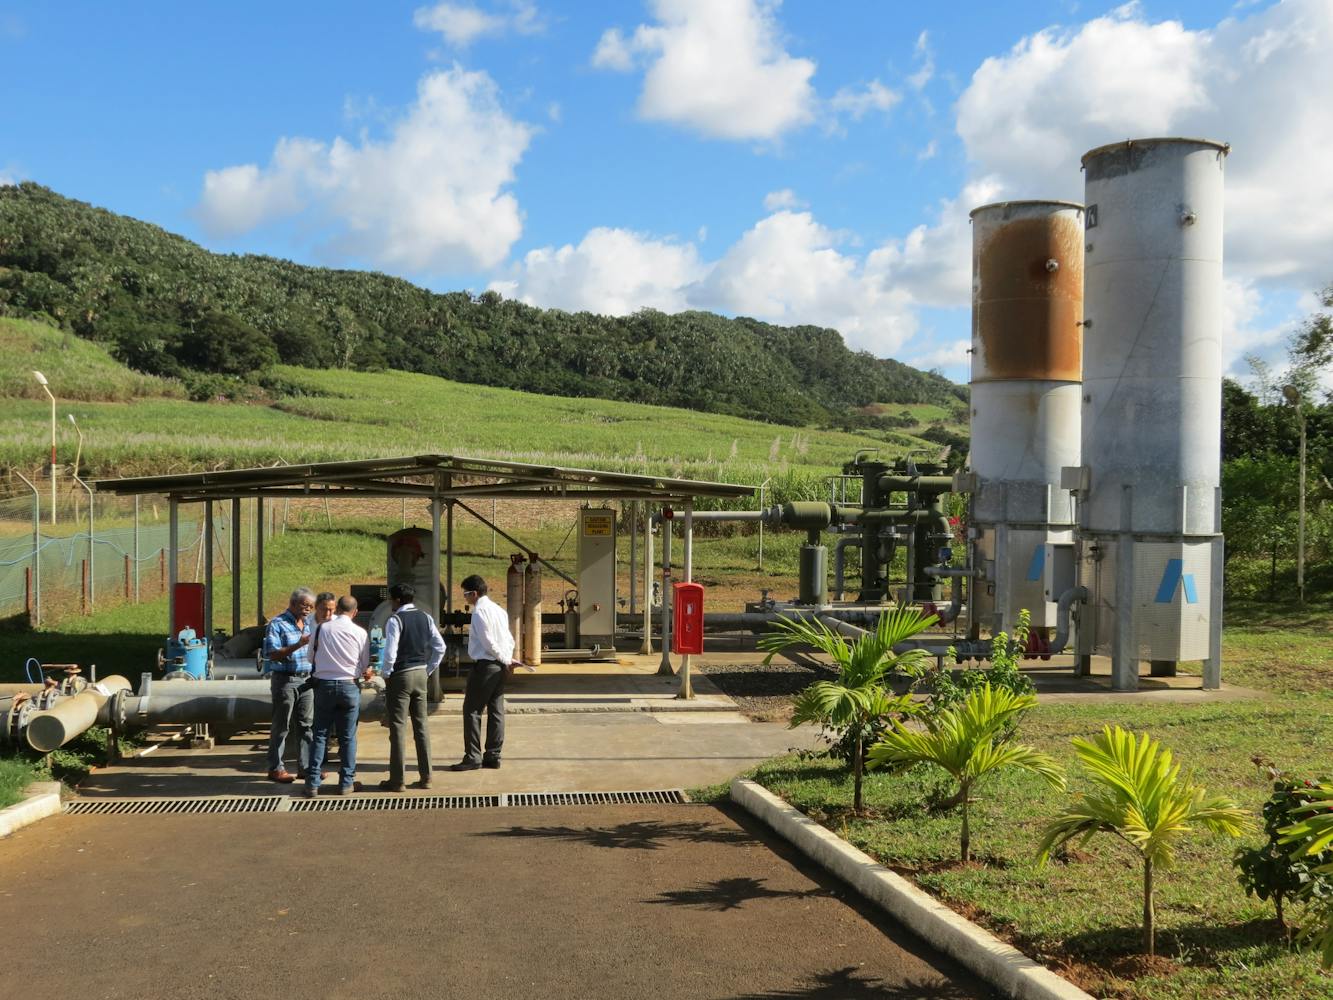 Towers for methane purification at a landfill in Mauritius